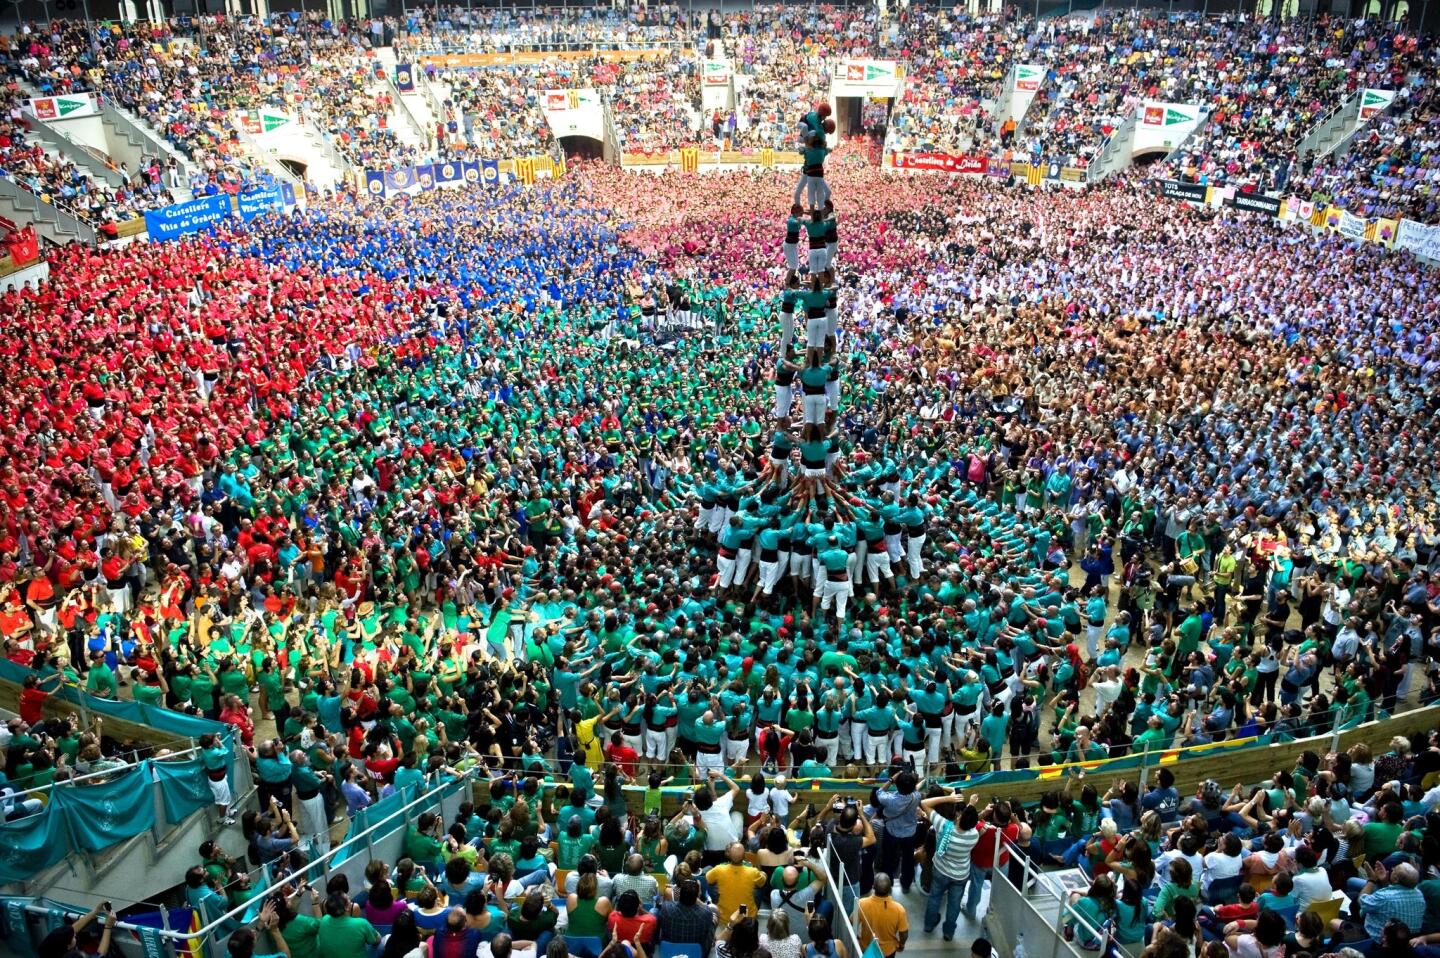 Each year, thousands gather in Tarragona, a city in Spain's Catalonia region about 50 miles southwest of Barcelona, for its annual castells competition, where teams made of up to hundreds of people collaborate to build human towers. Building human towers, or castells, is an old Catalan tradition dating back over two hundred years. Each castell (a Catalan word for castle) is built by a team, called a colla, consisting of between 75 to 500 men and women. Young and light members form the top of a tower while heavier members form the base. Music plays as a team erects its tower, usually between six and ten levels high. More photos...